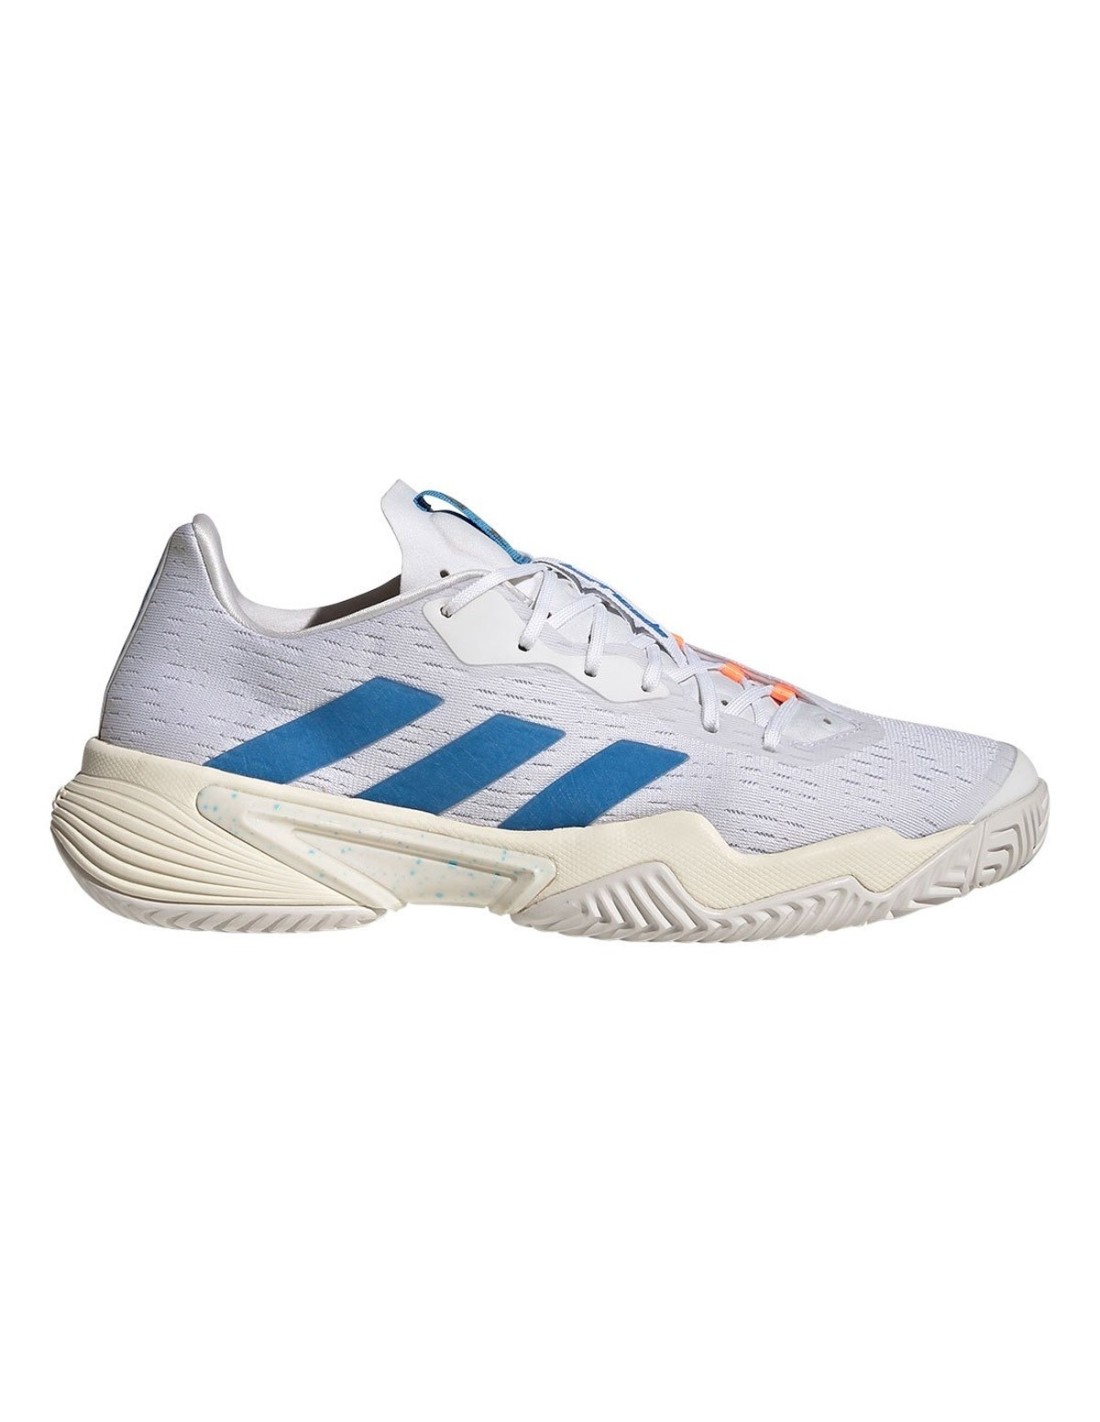 Adidas Barricade M Parley GY1369 | ADIDAS padel shoes | Time2Padel